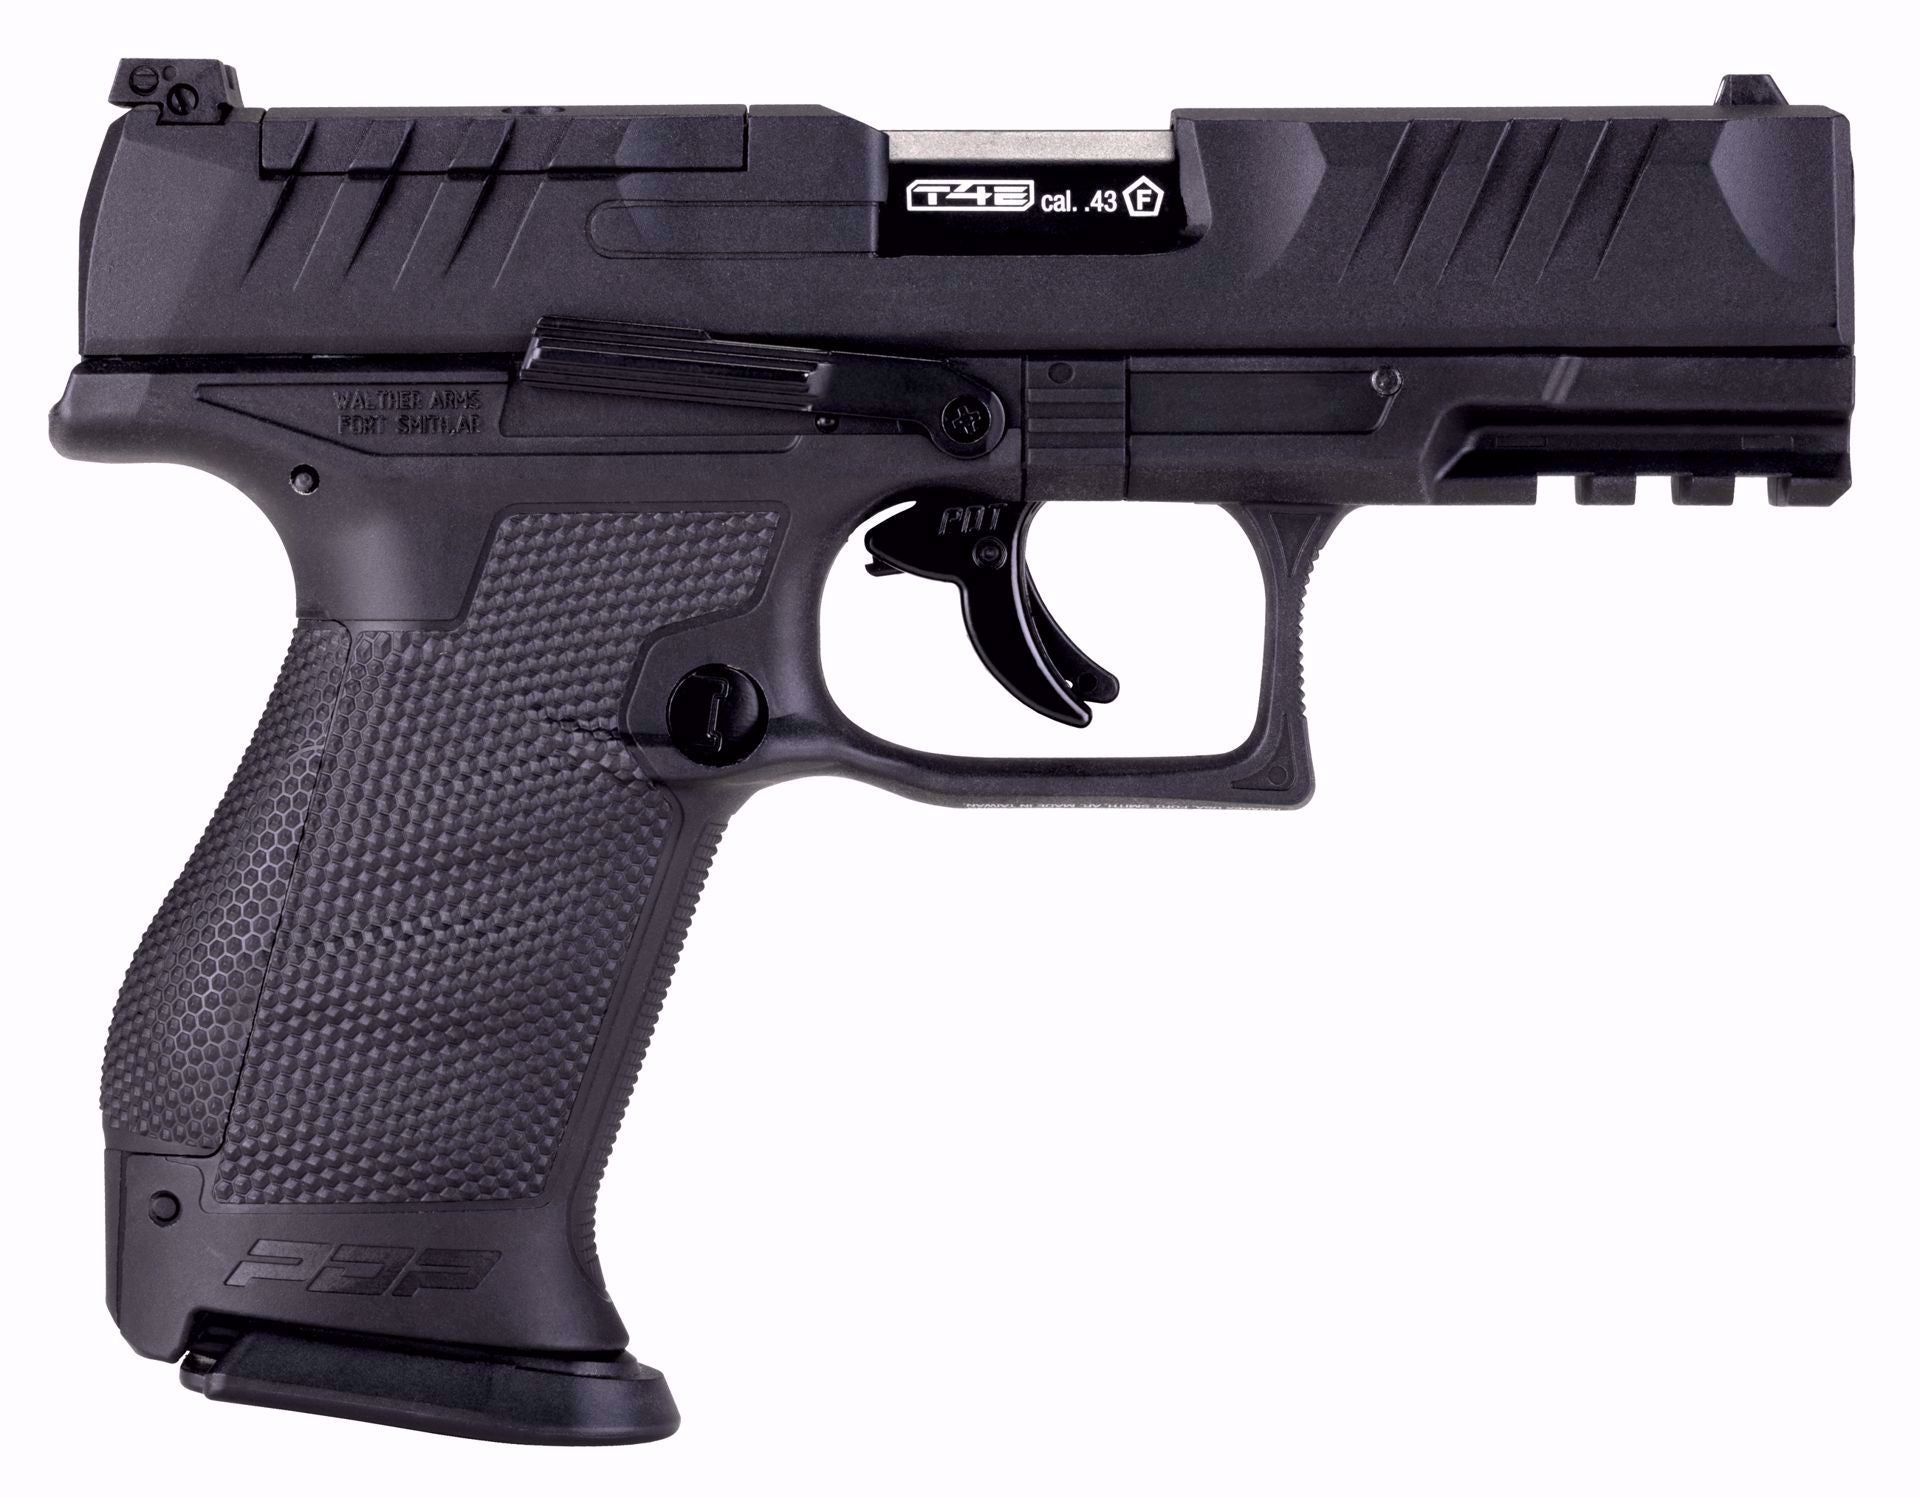 0007548_t4e-walther-pdp-compact-4-optics-ready-paintball-marker-43-cal-black.jpg